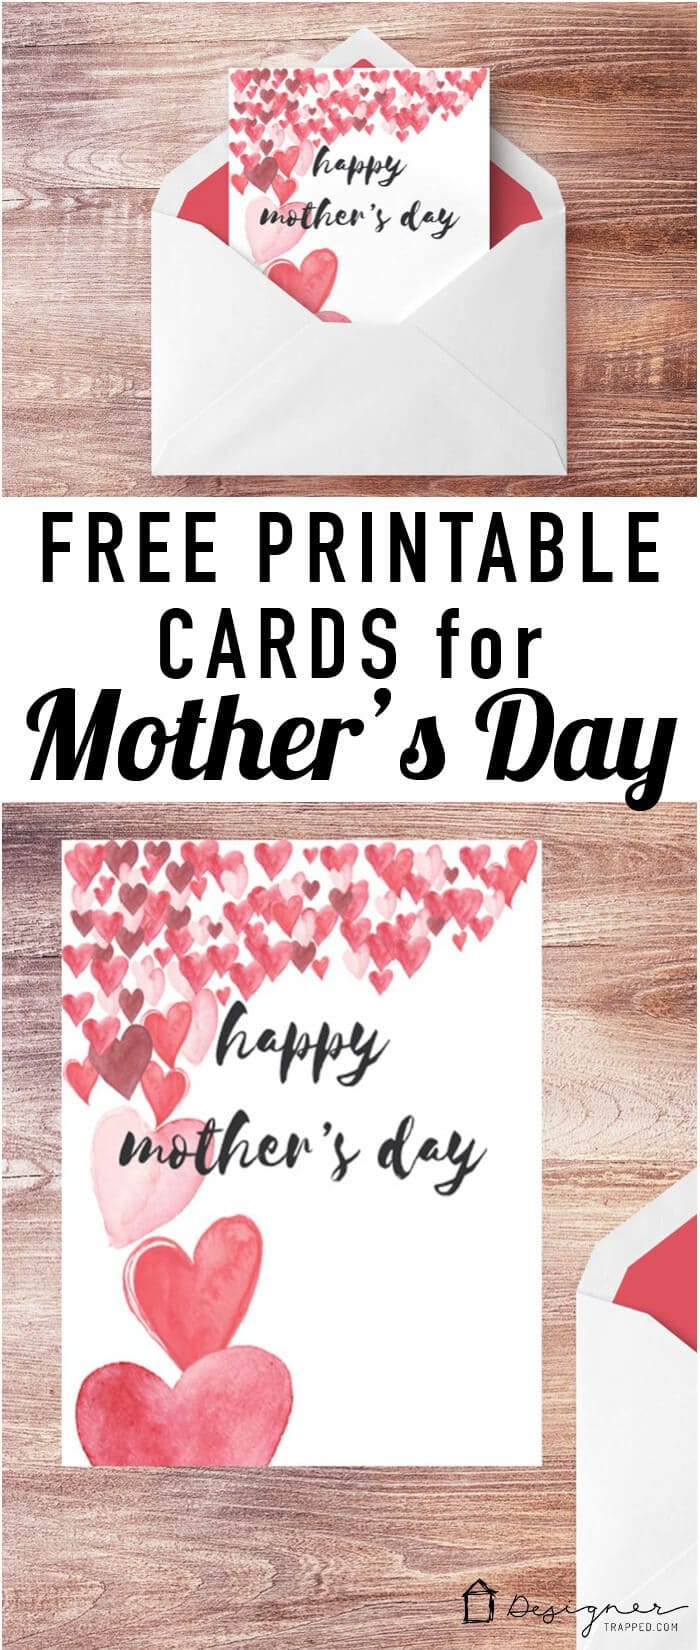 print-mothers-day-cards-beautiful-choose-from-thousands-of-templates